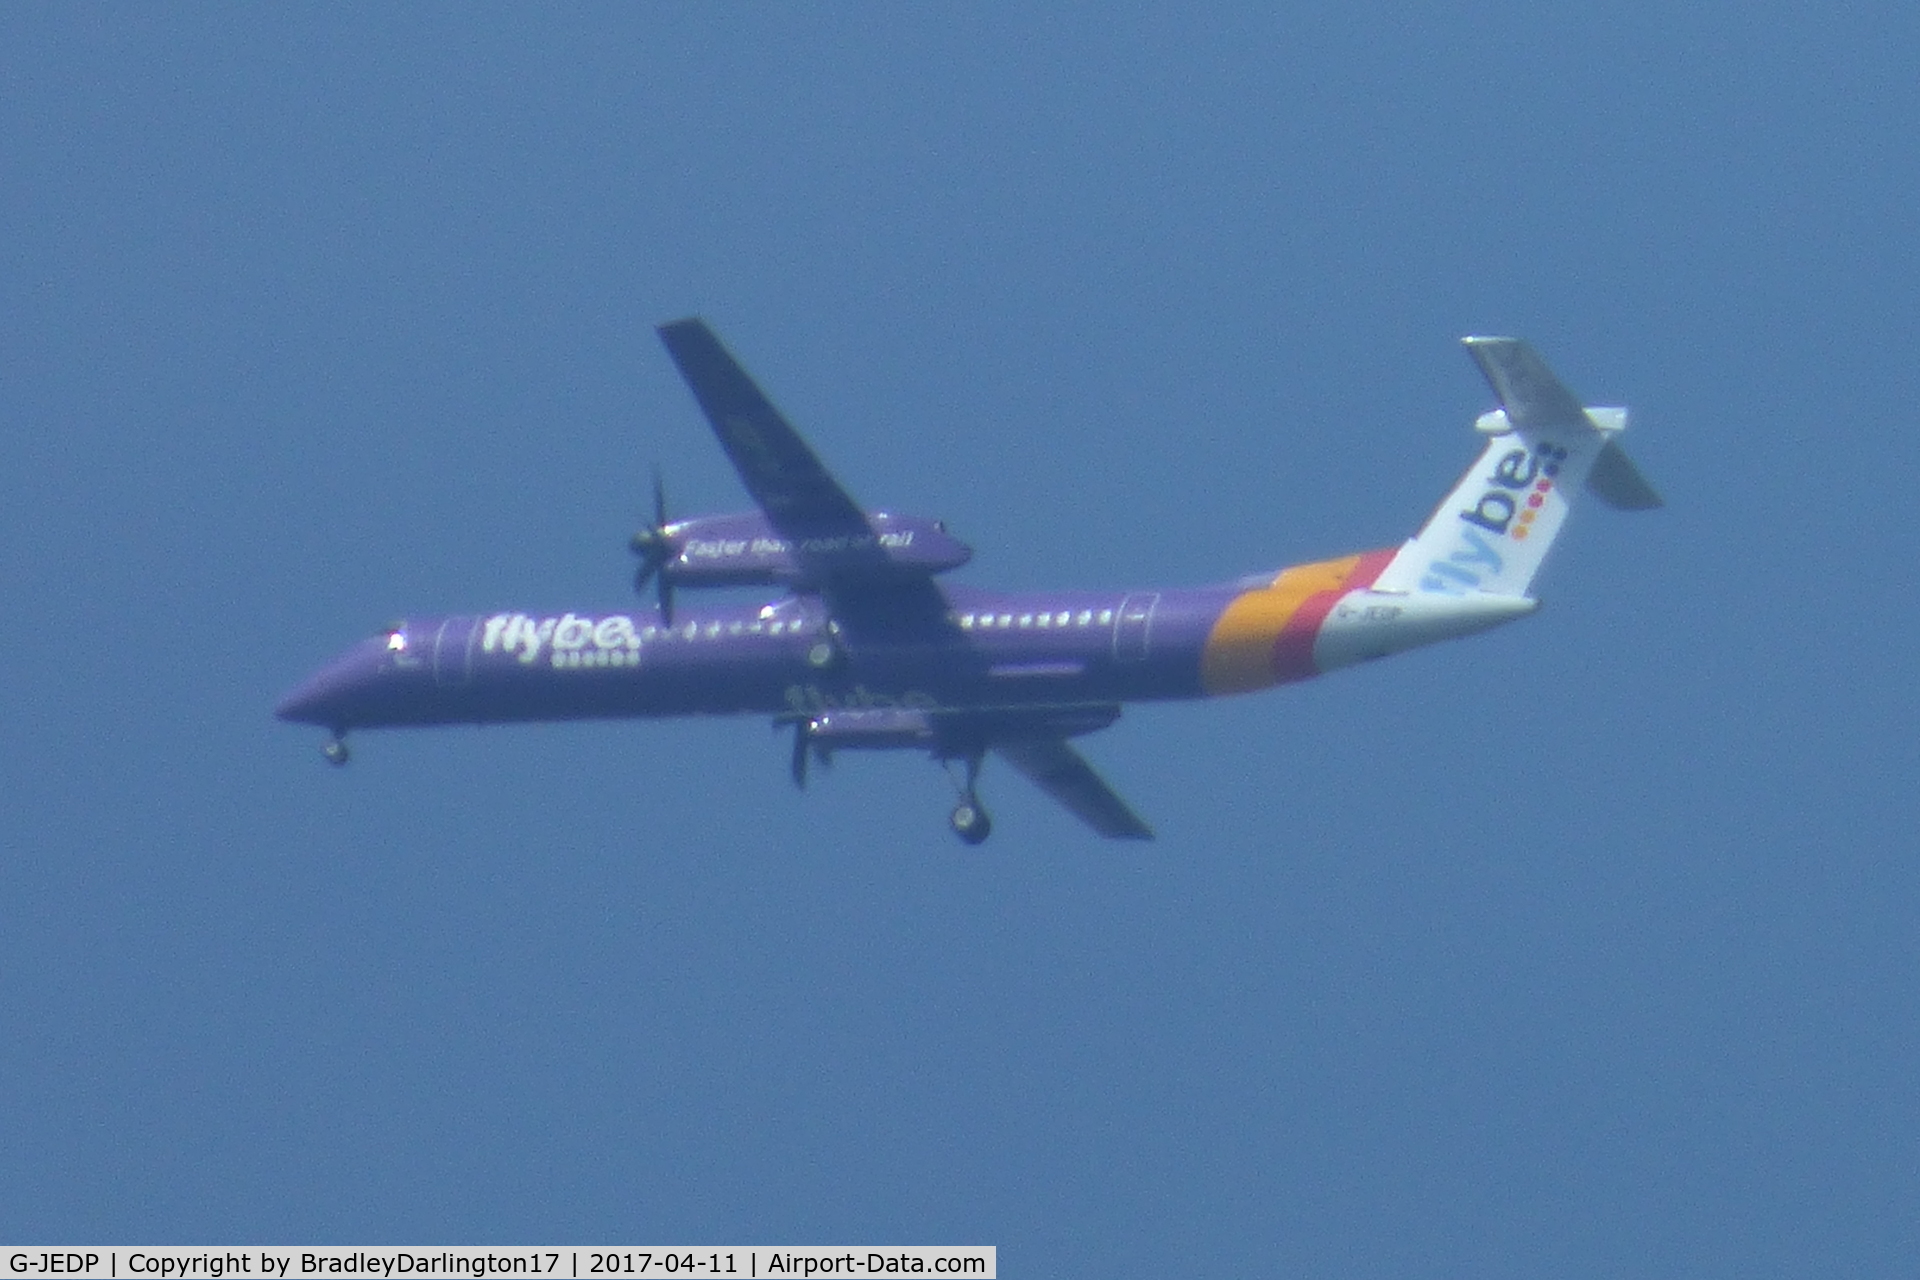 G-JEDP, 2003 De Havilland Canada DHC-8-402Q Dash 8 C/N 4085, Bombardier Dash 8 Q400 flying at 5,000ft over plymouth